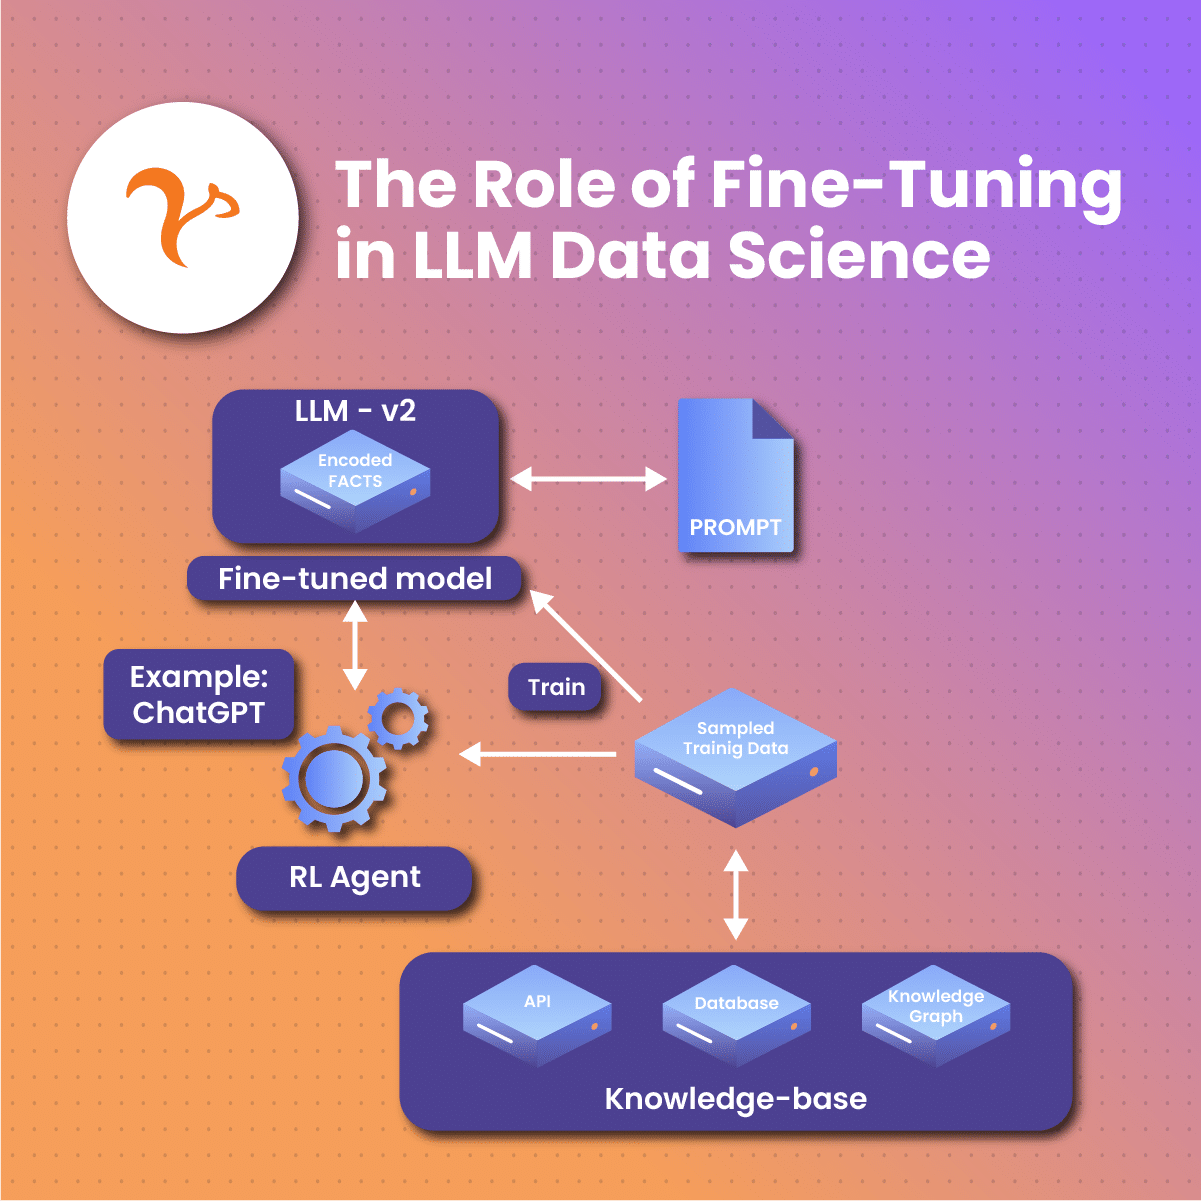 The Role of Fine-Tuning in LLM Data Science